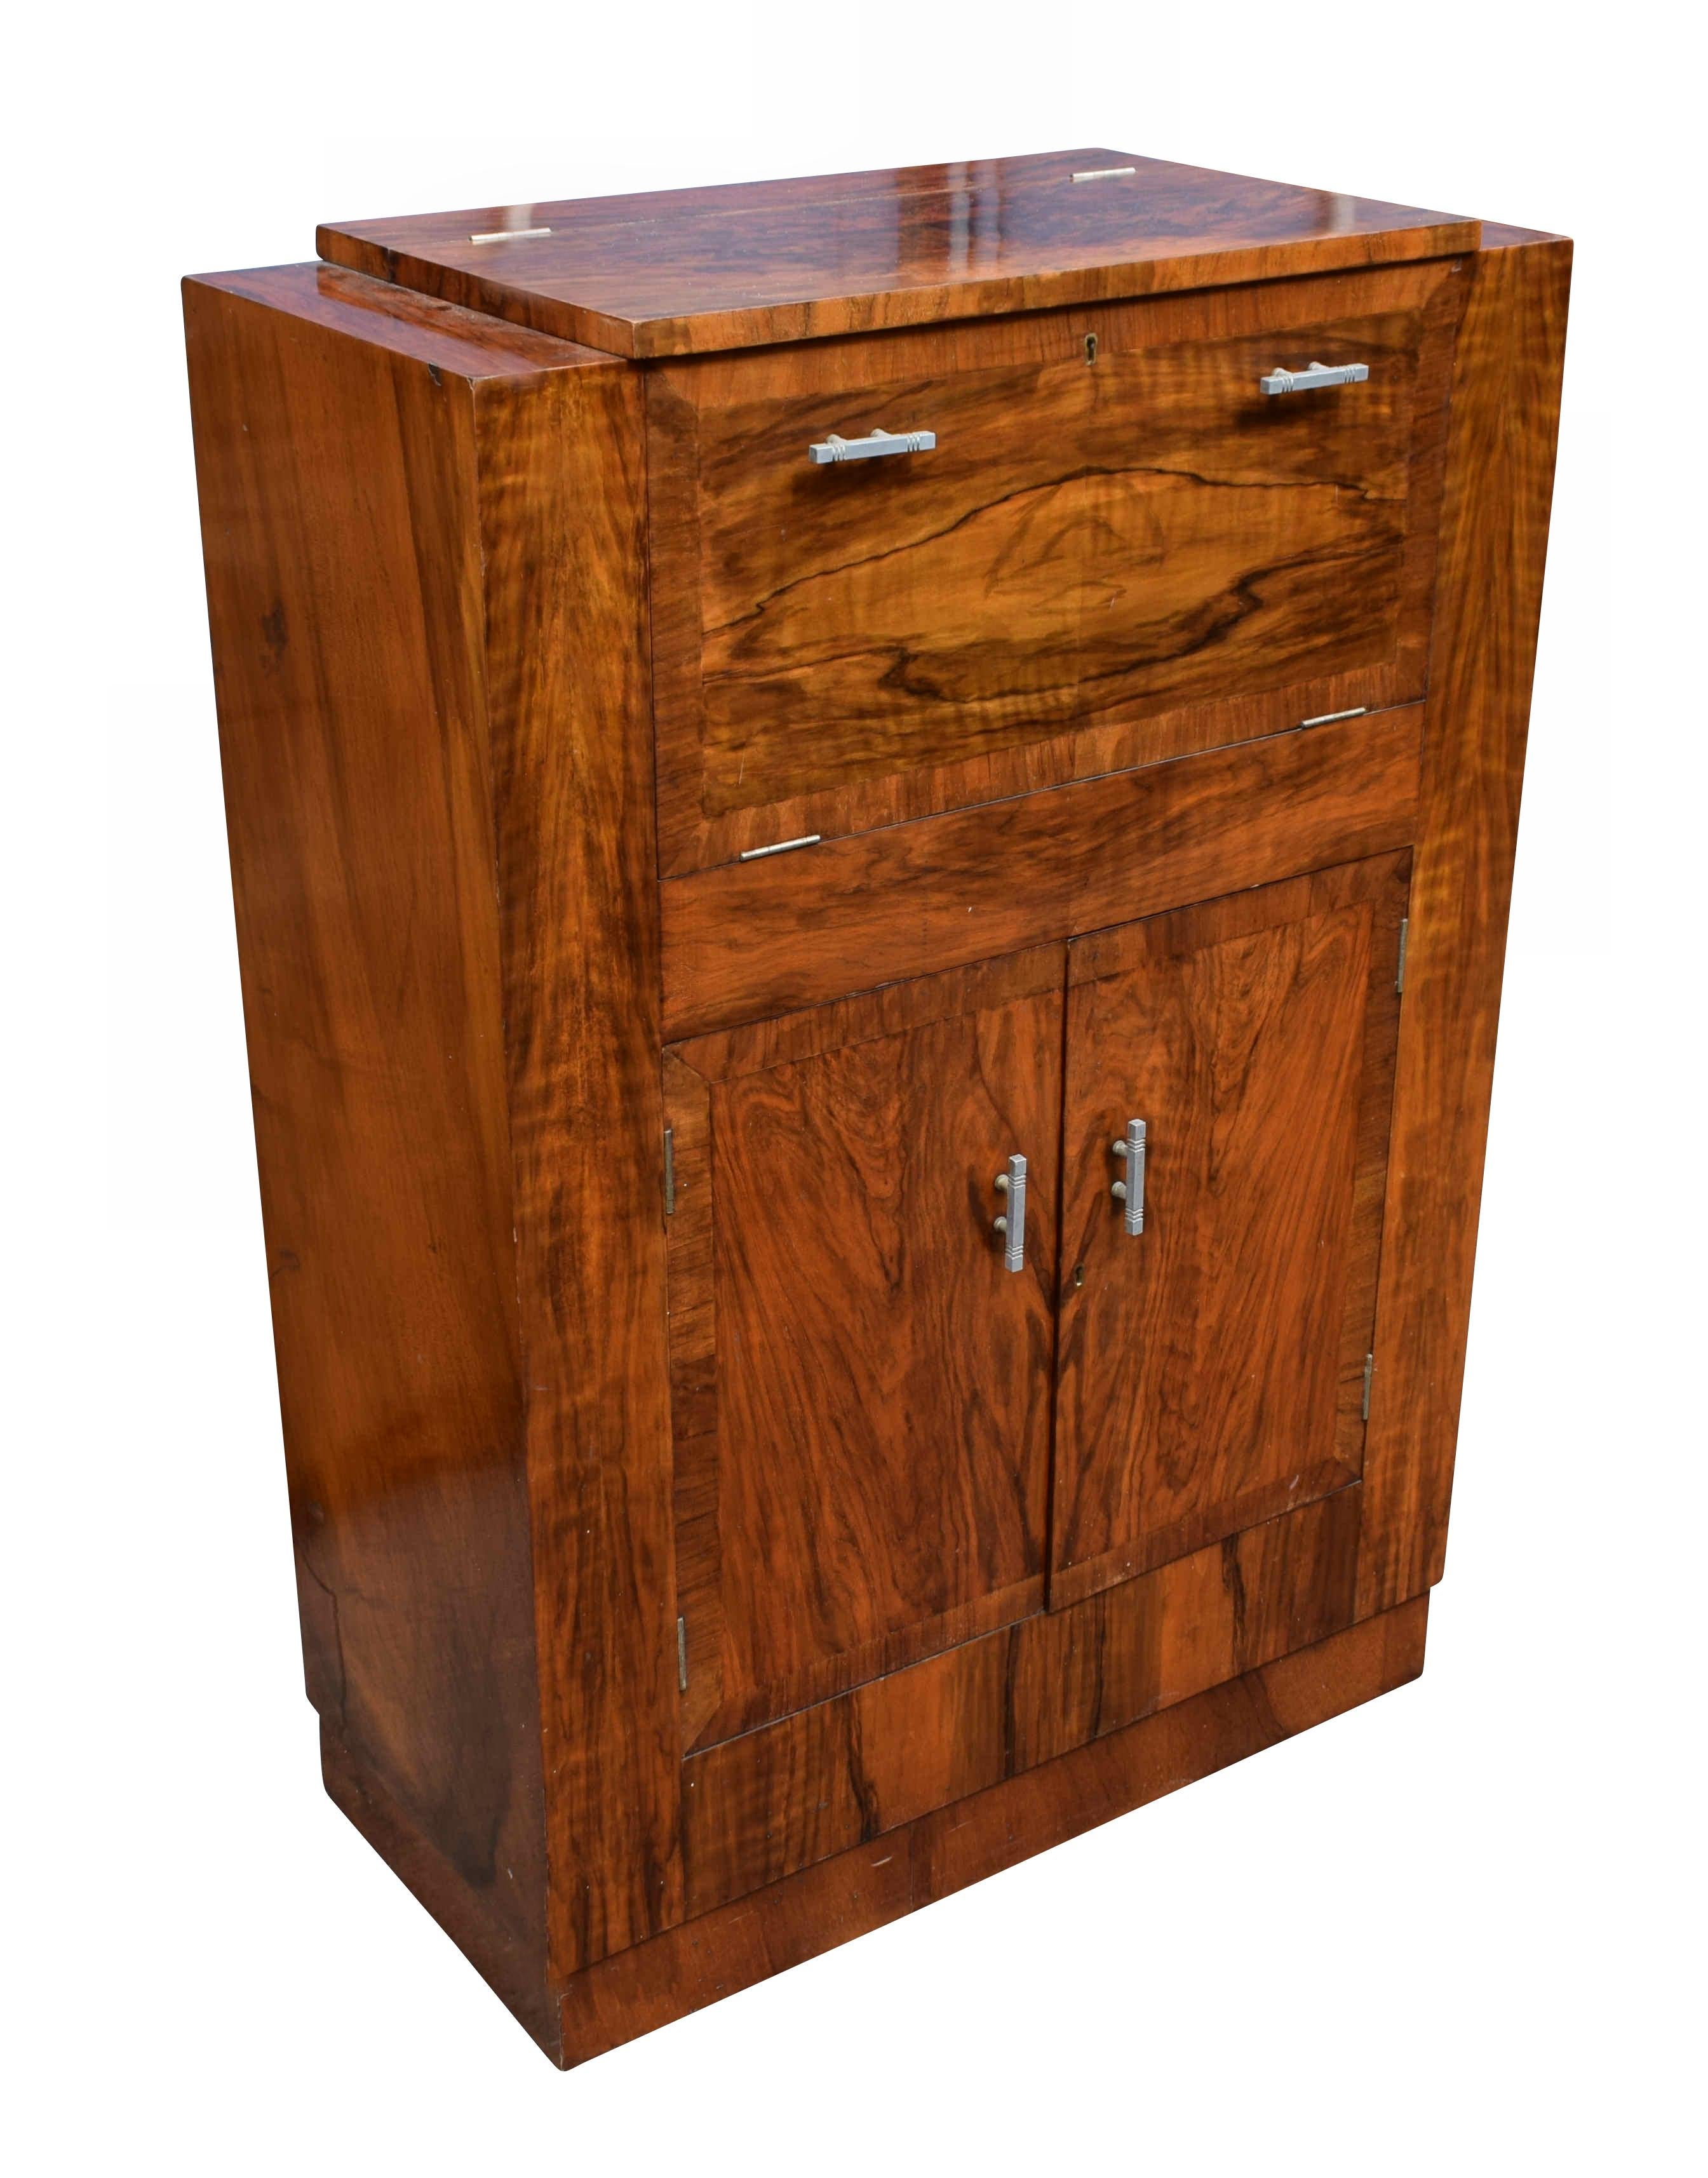 English Art Deco Fitted Burr Walnut Cocktail Cabinet, circa 1930s